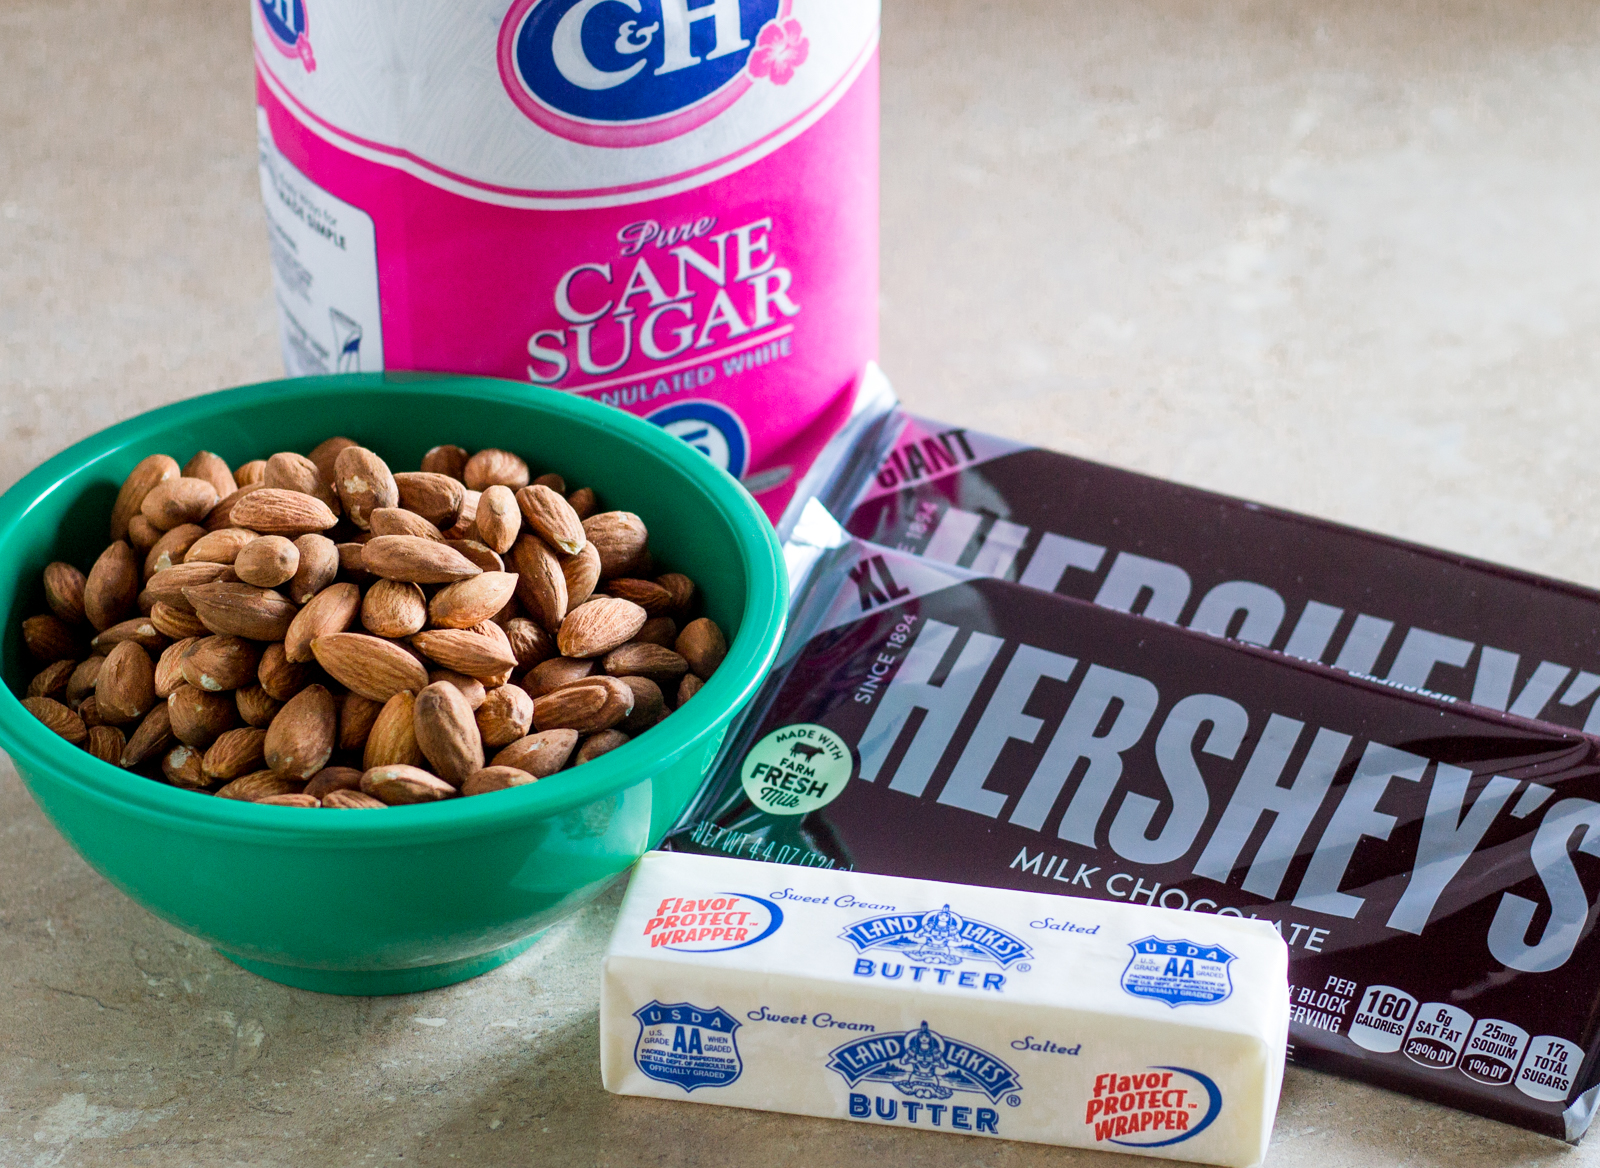 Ingredients for English toffee sugar butter almonds chocolate